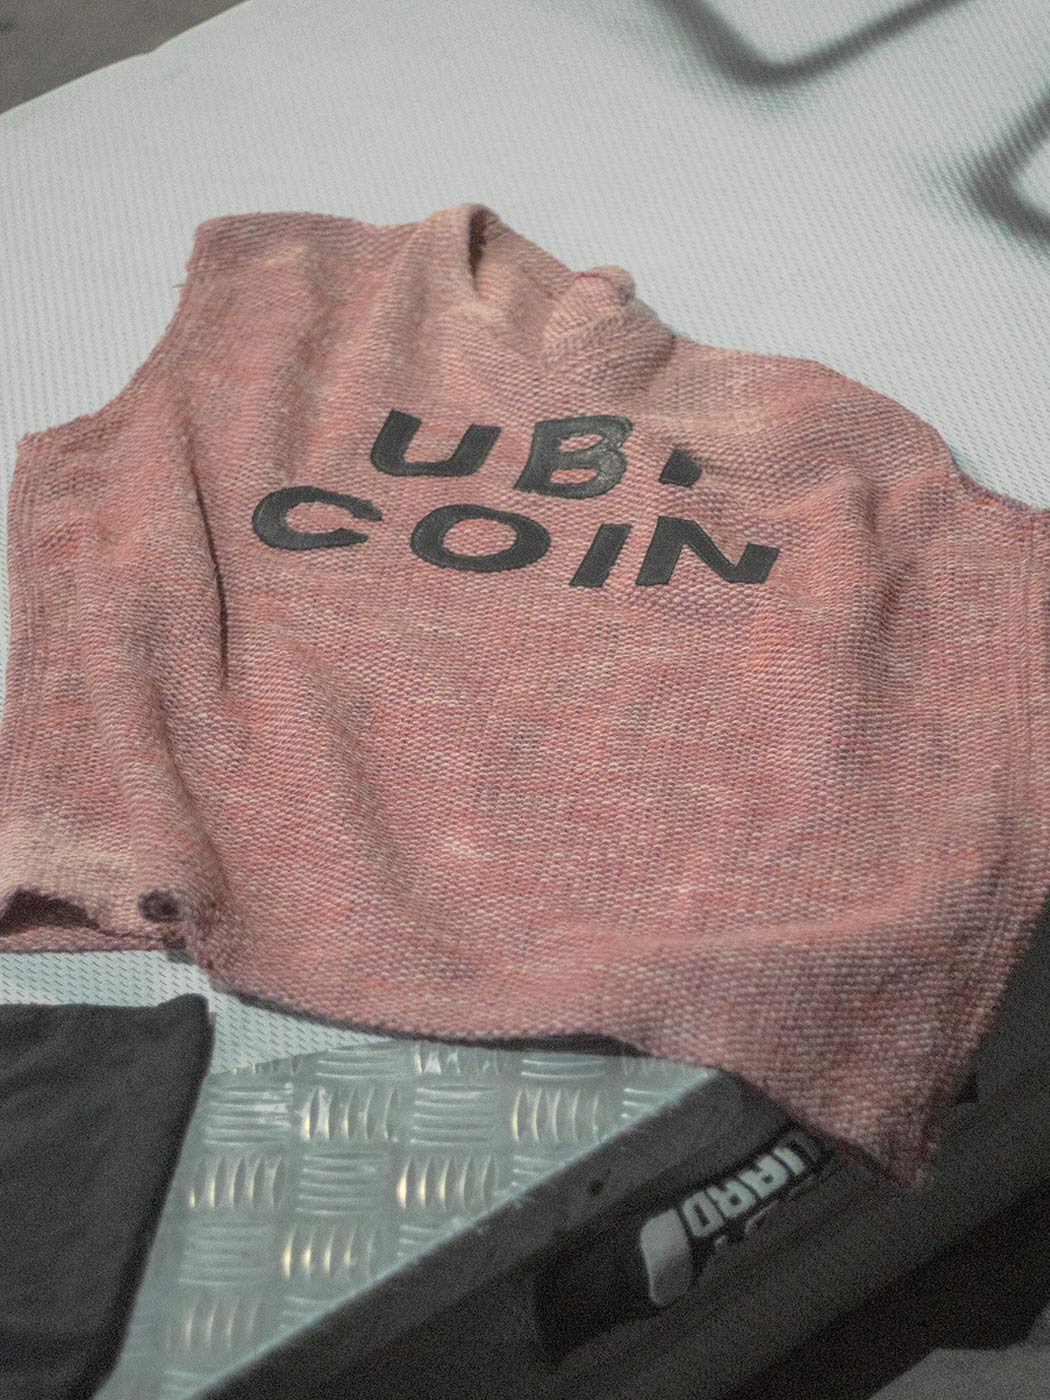 A top made of rose-colored costume fabric on a light grey mattress. The lettering Ub1 Coin can be read on the top.